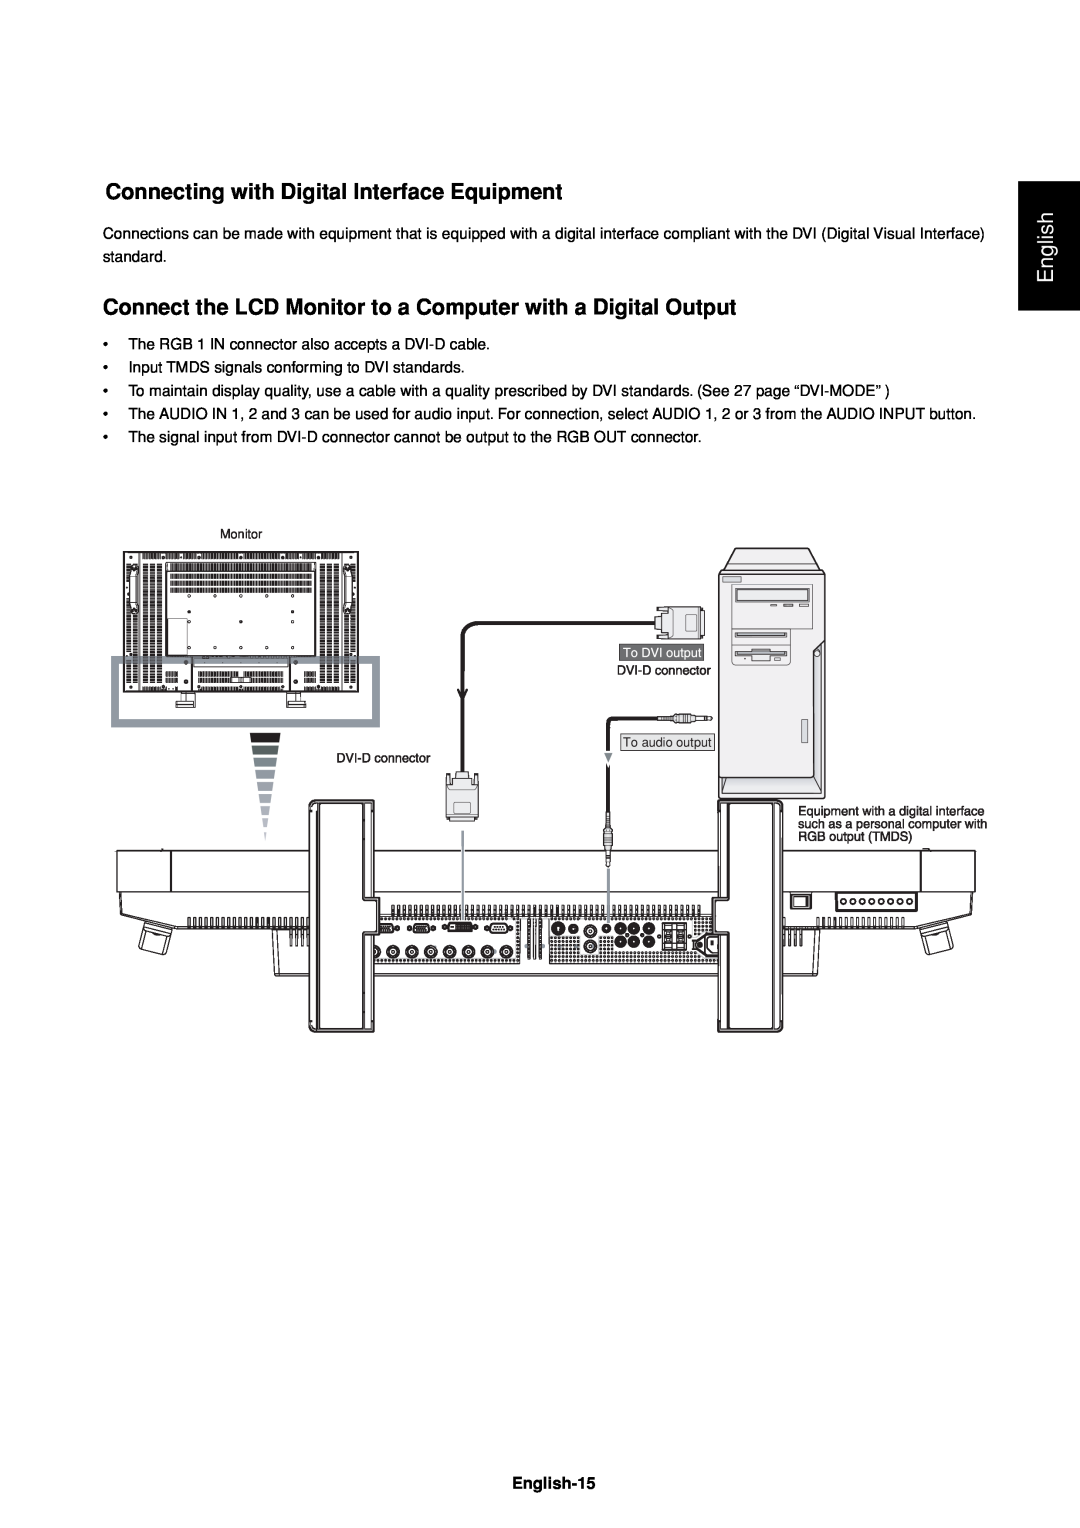 Mitsubishi Electronics LDT37IV (BH544), LDT32IV (BH548) manual Connecting with Digital Interface Equipment, English-15 